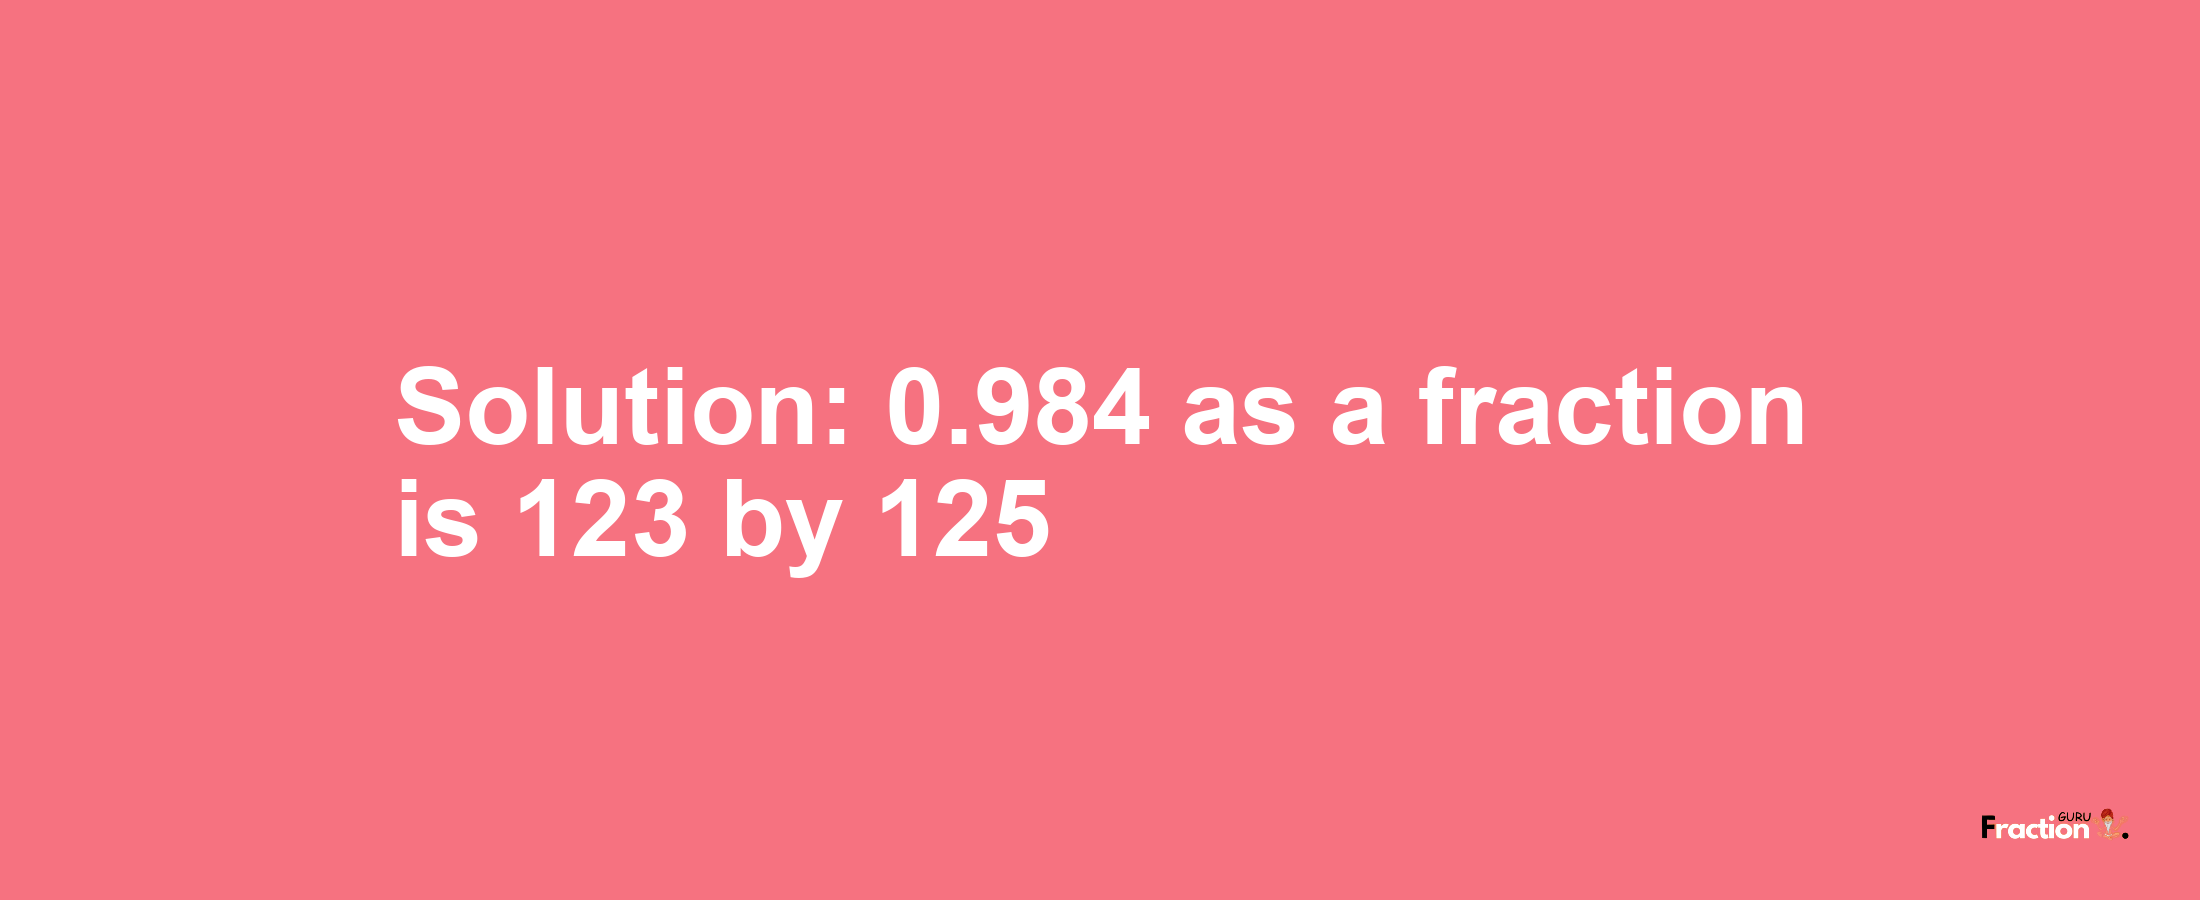 Solution:0.984 as a fraction is 123/125